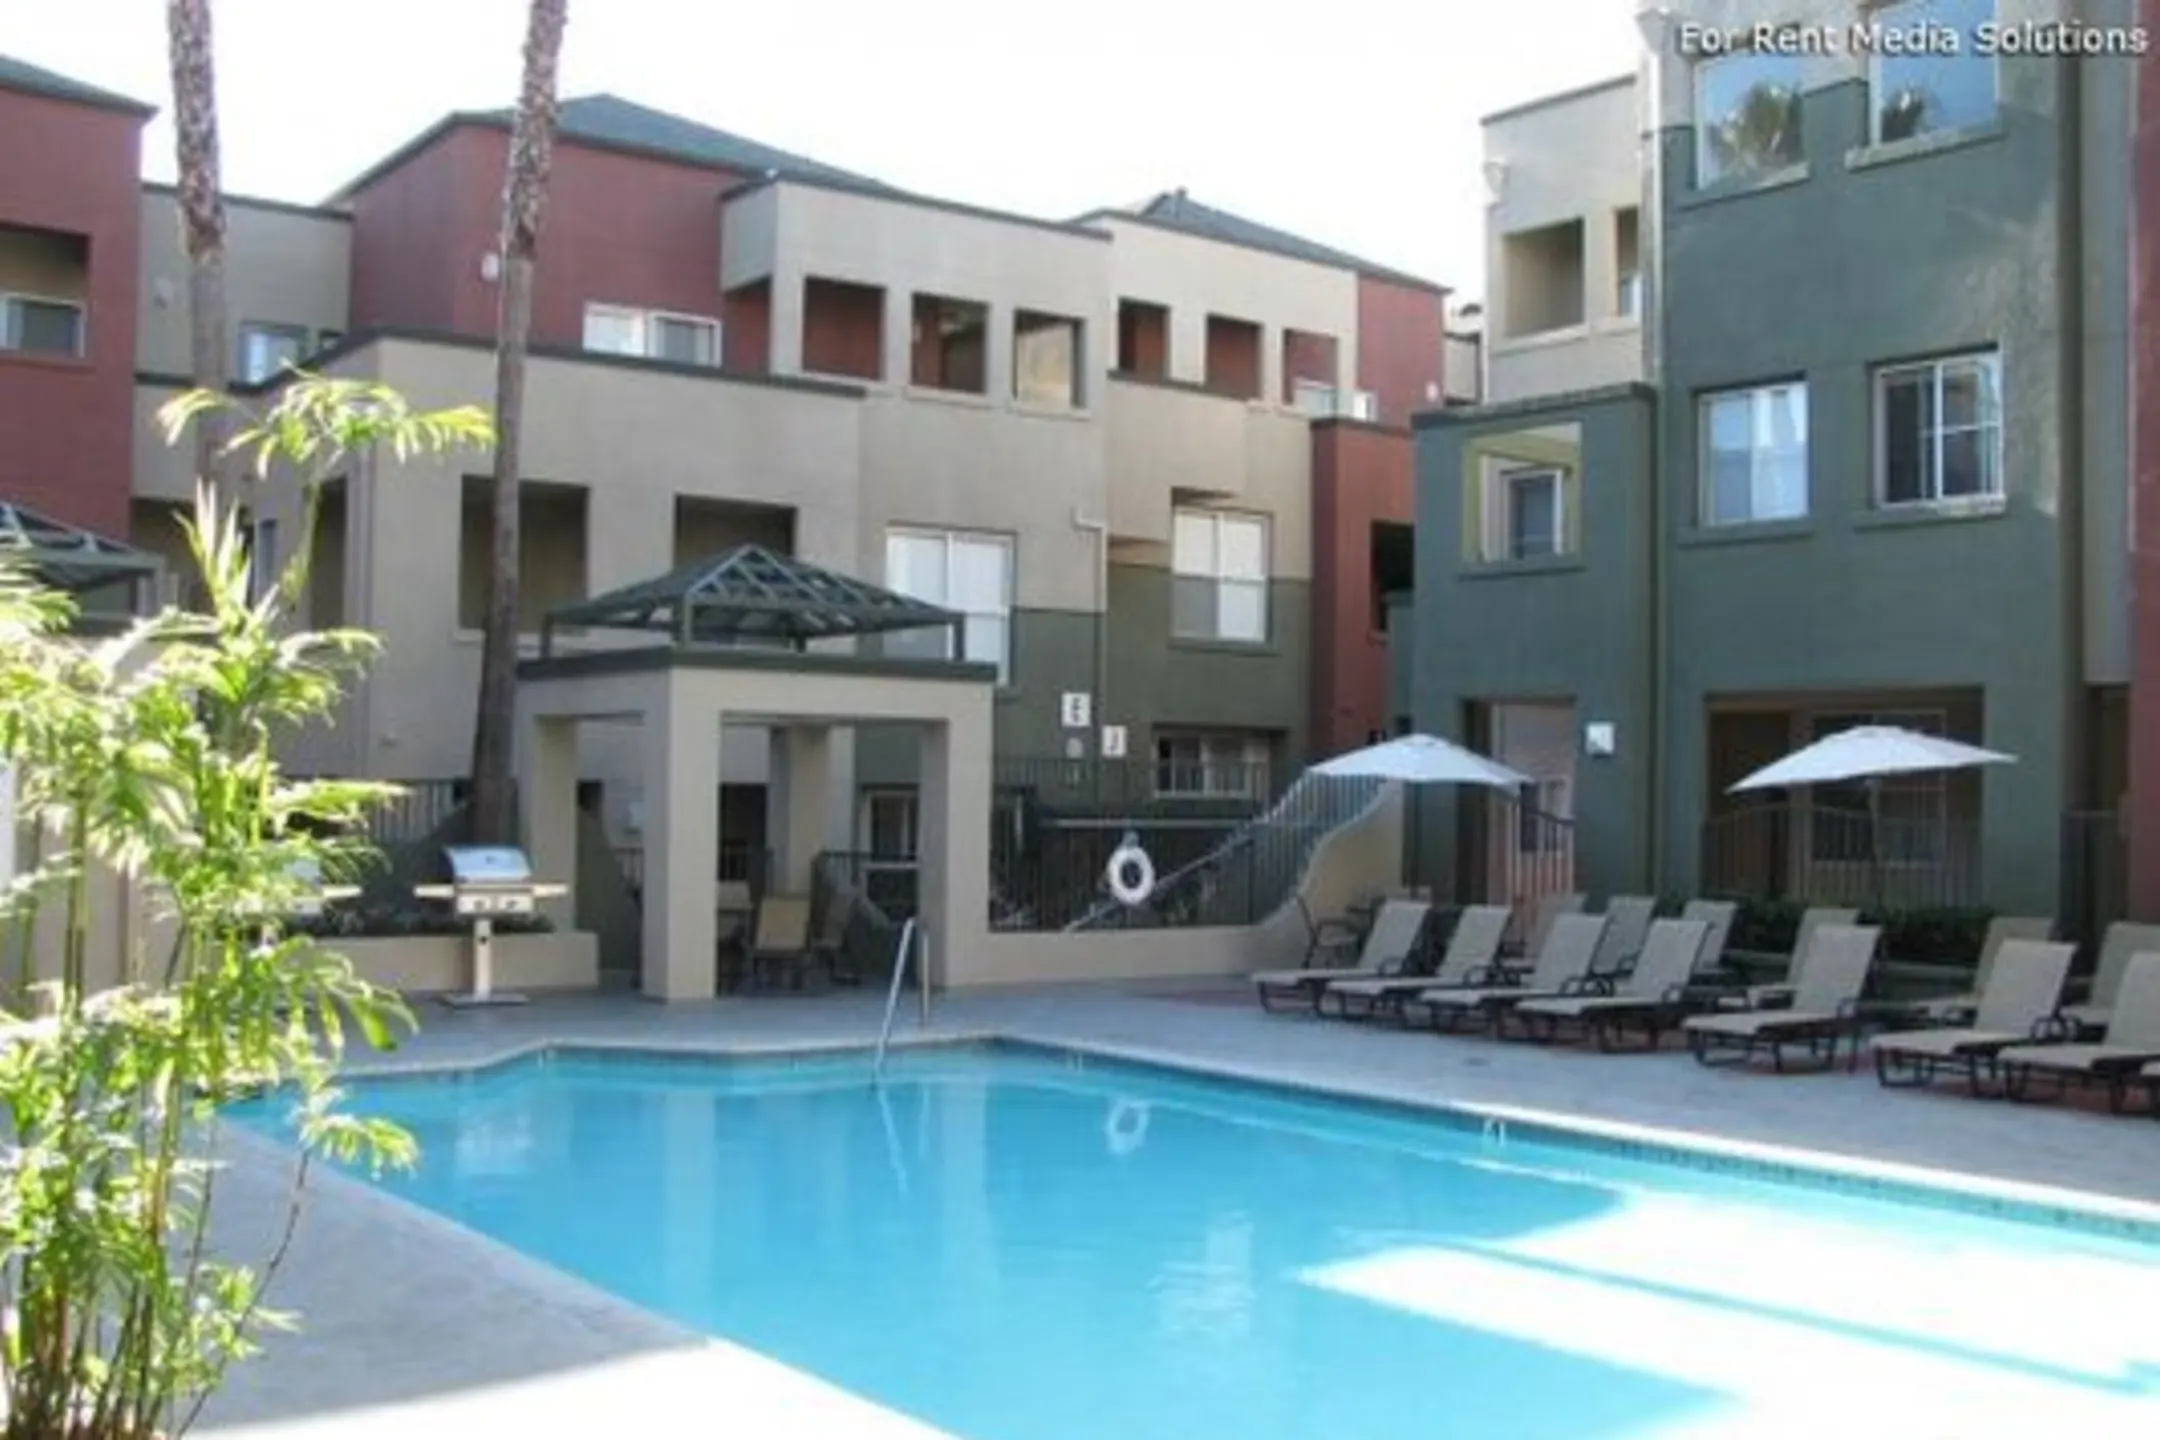 Pool - CentrePointe Apartments - Los Angeles, CA